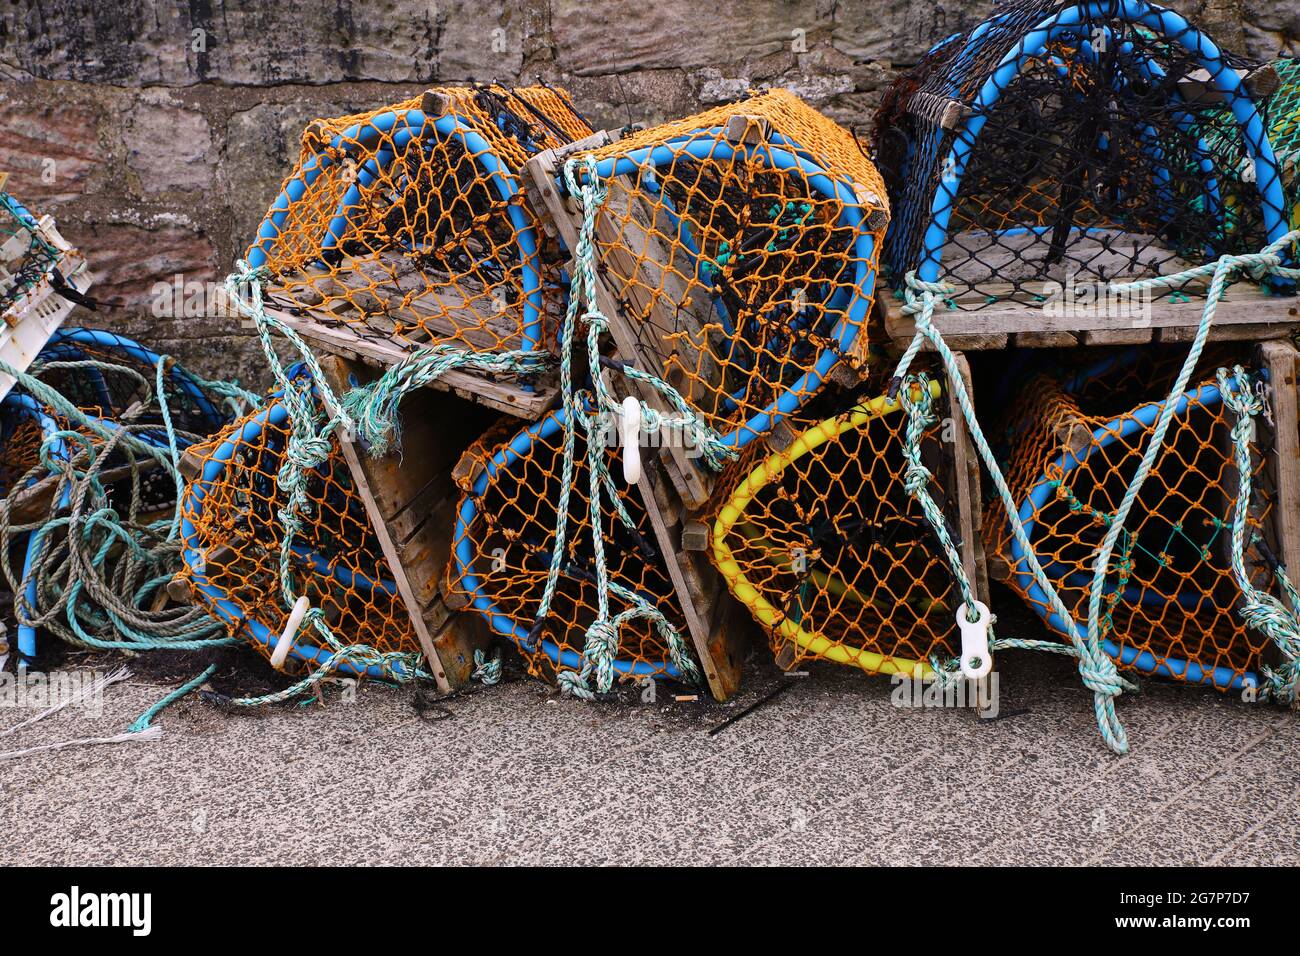 A lobster trap or lobster pot is a traps lobsters or crayfish.In